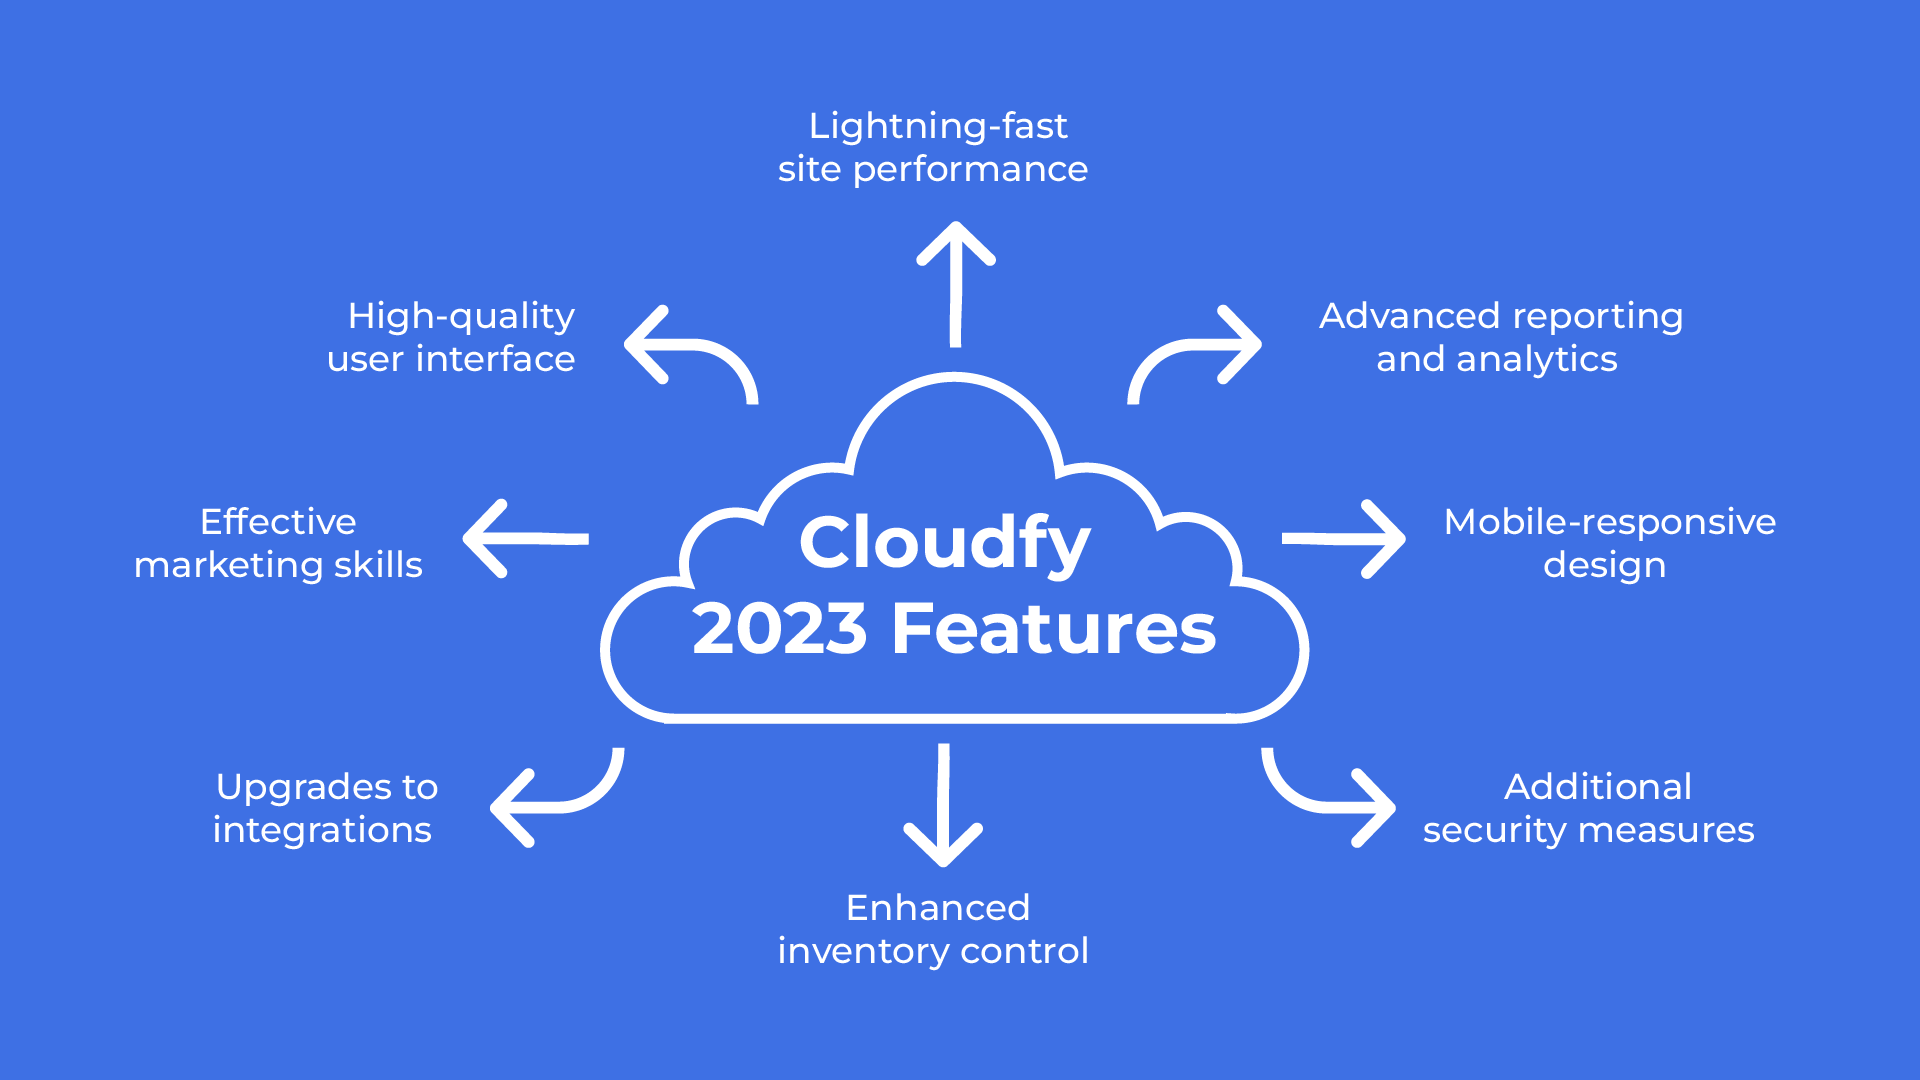 Cloudfy’s Cutting-edge 2023 features